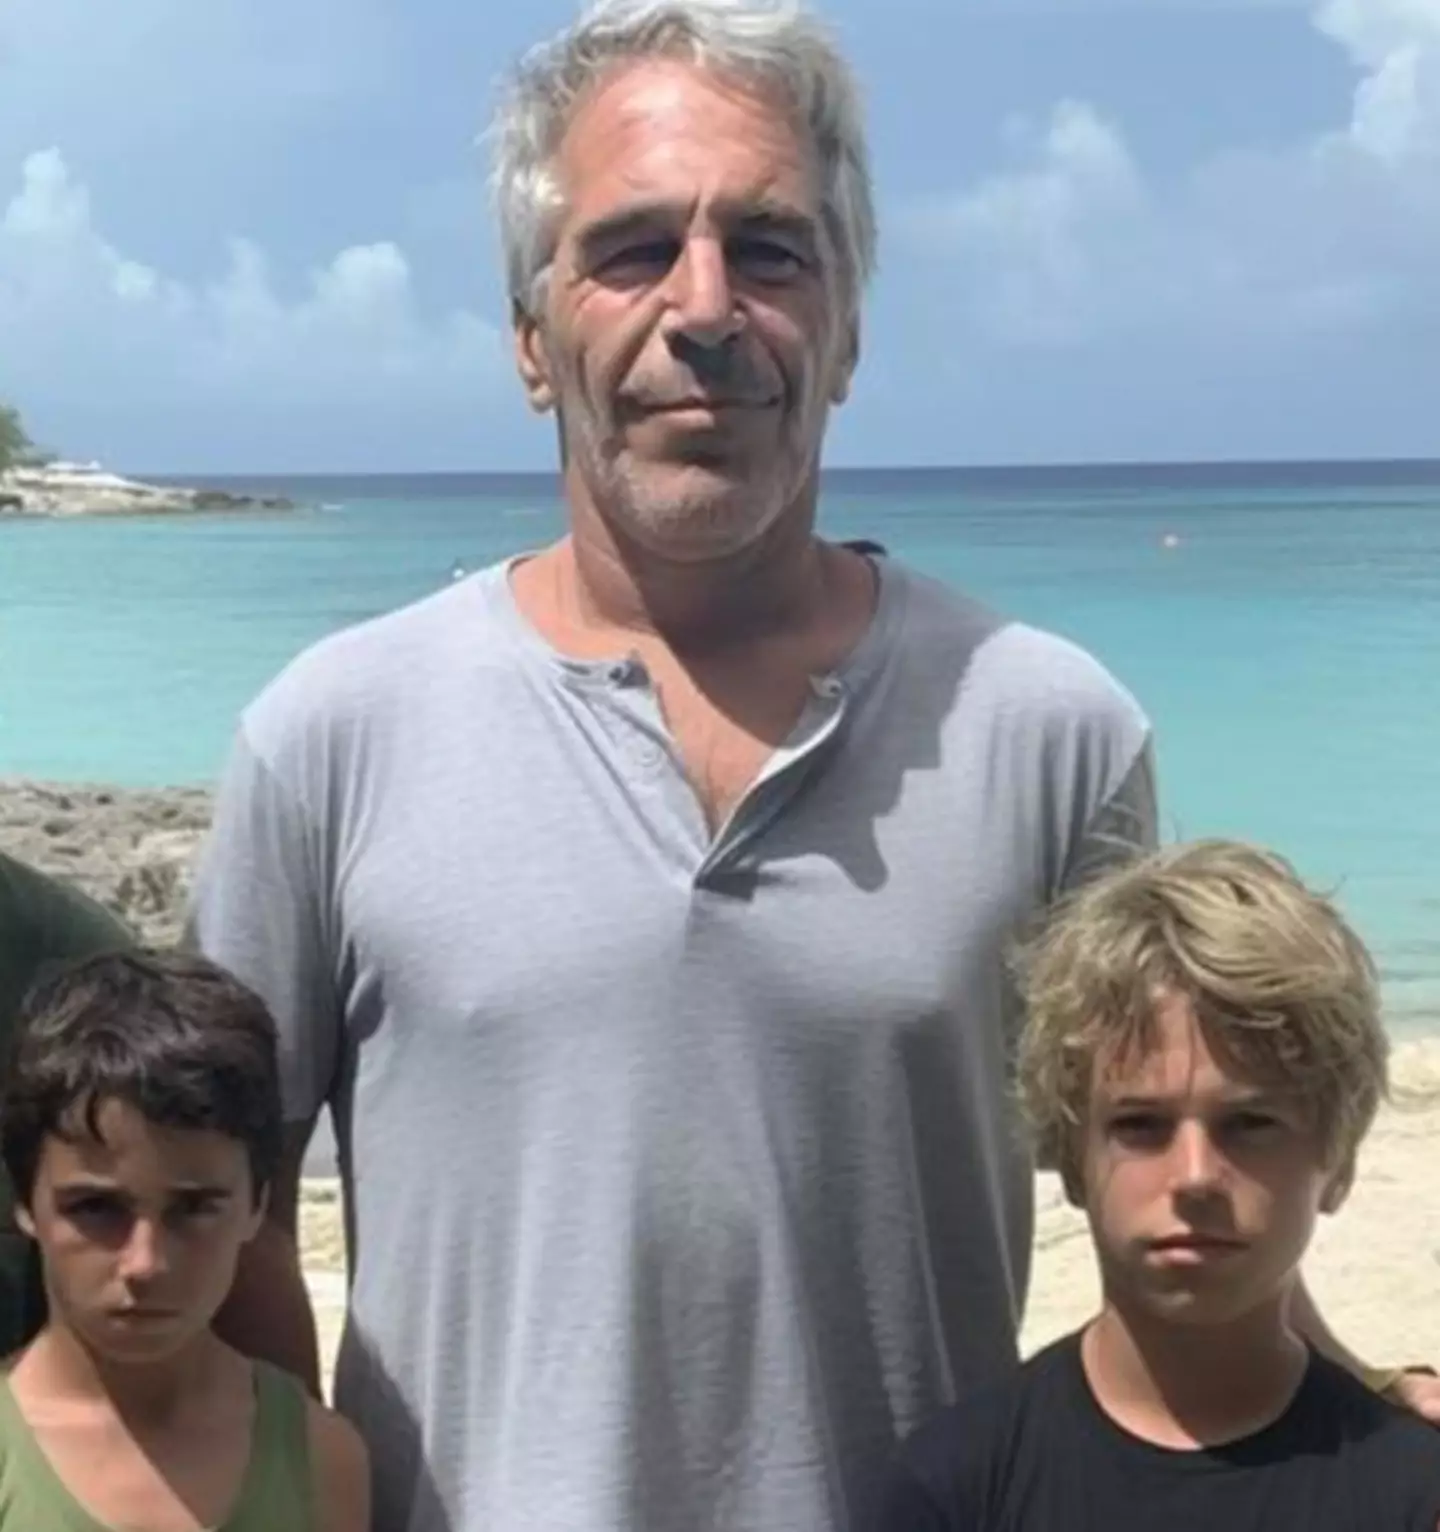 The image of Epstein.